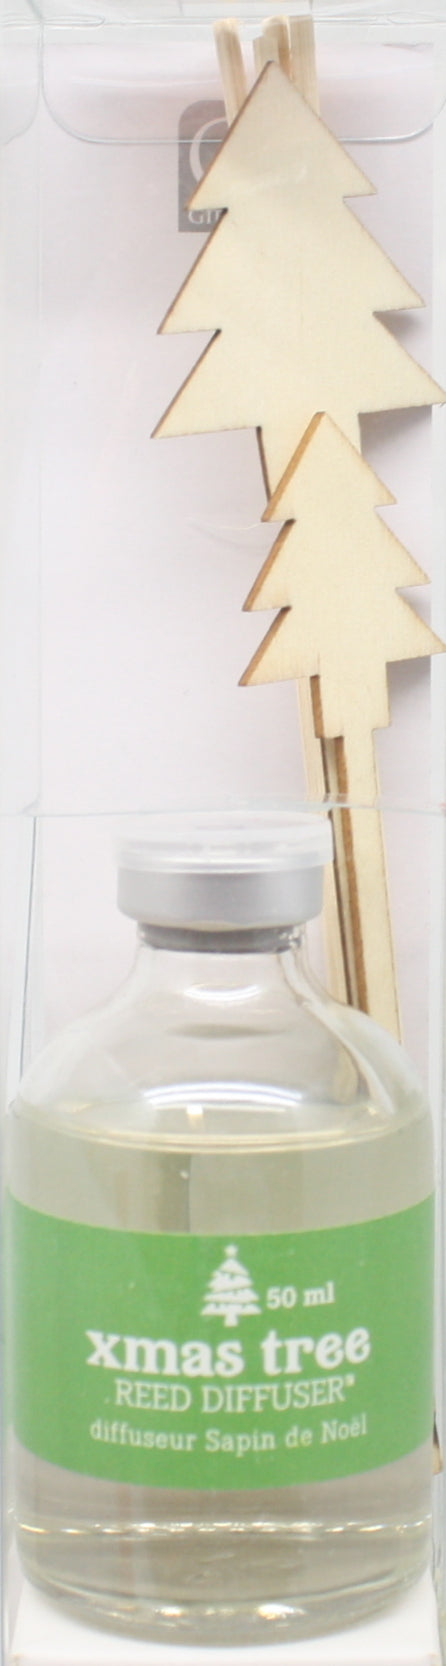 Christmas Reed Diffuser - - The Country Christmas Loft